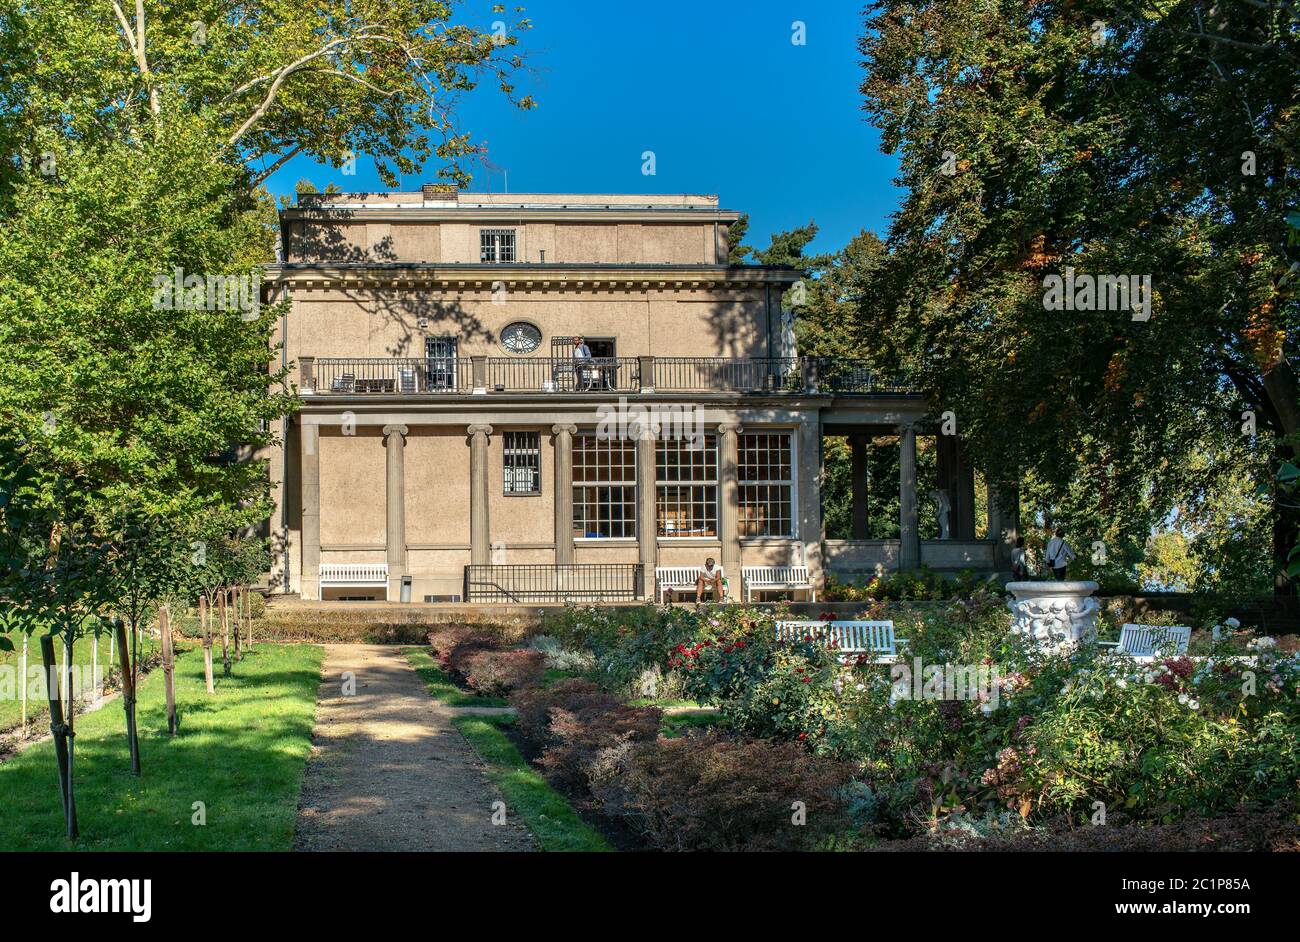 House of the Wannsee Conference Stock Photo